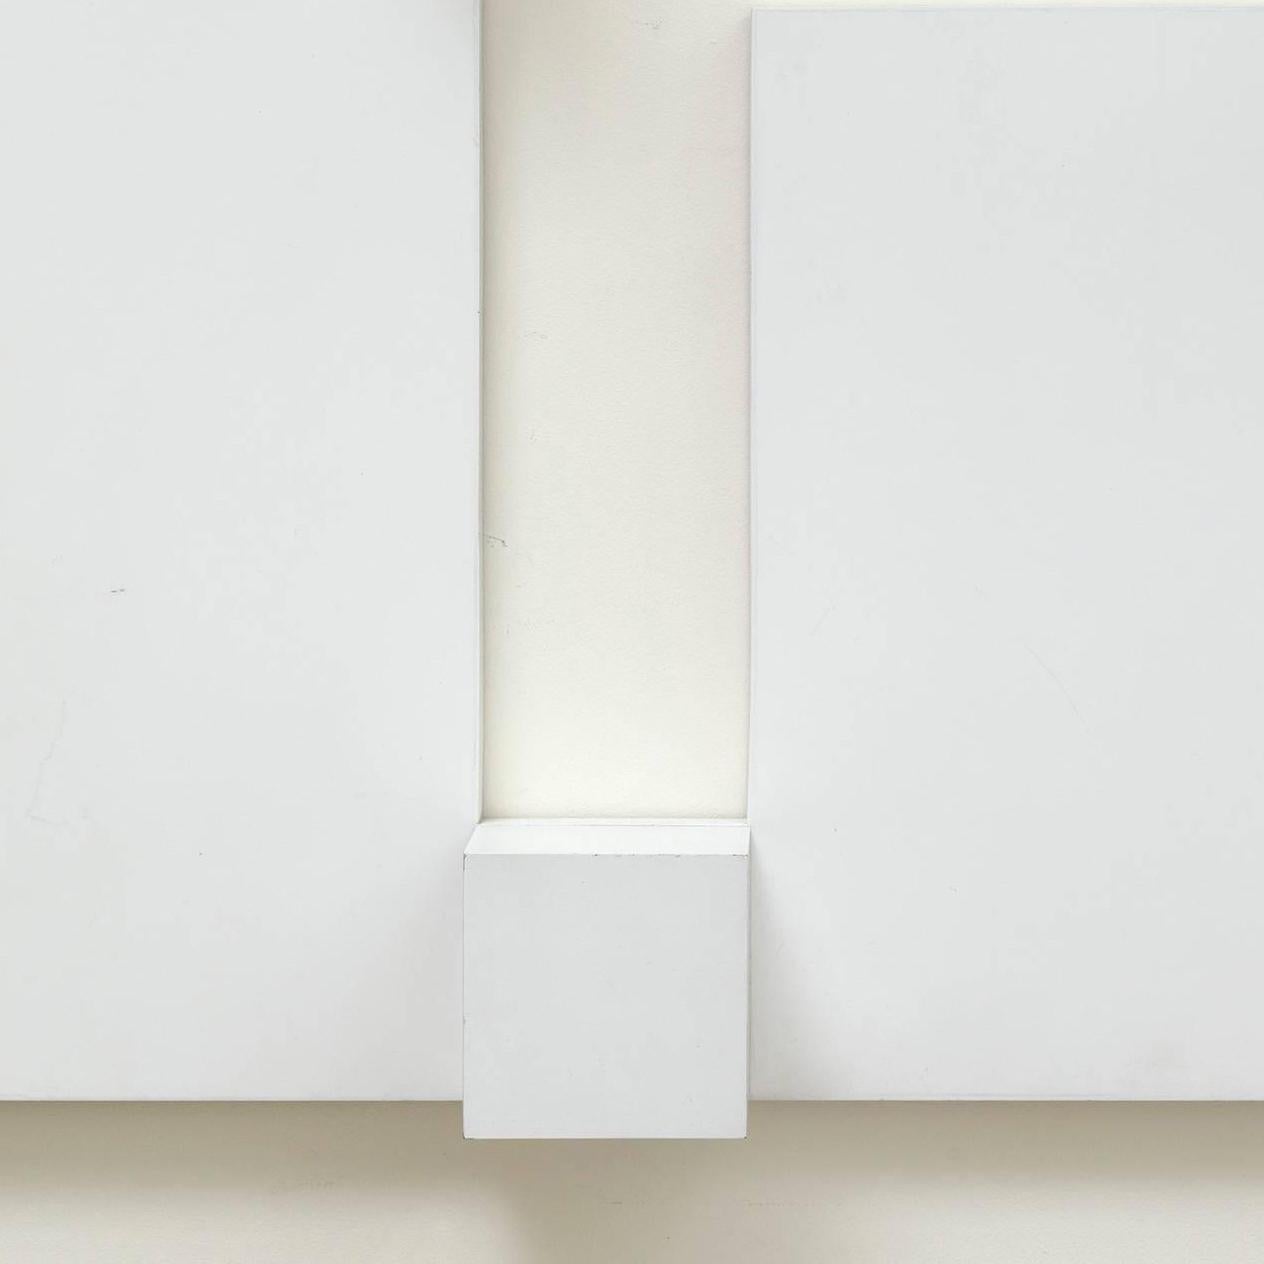 White relief 2 - Abstract Geometric Sculpture by Peter Lowe